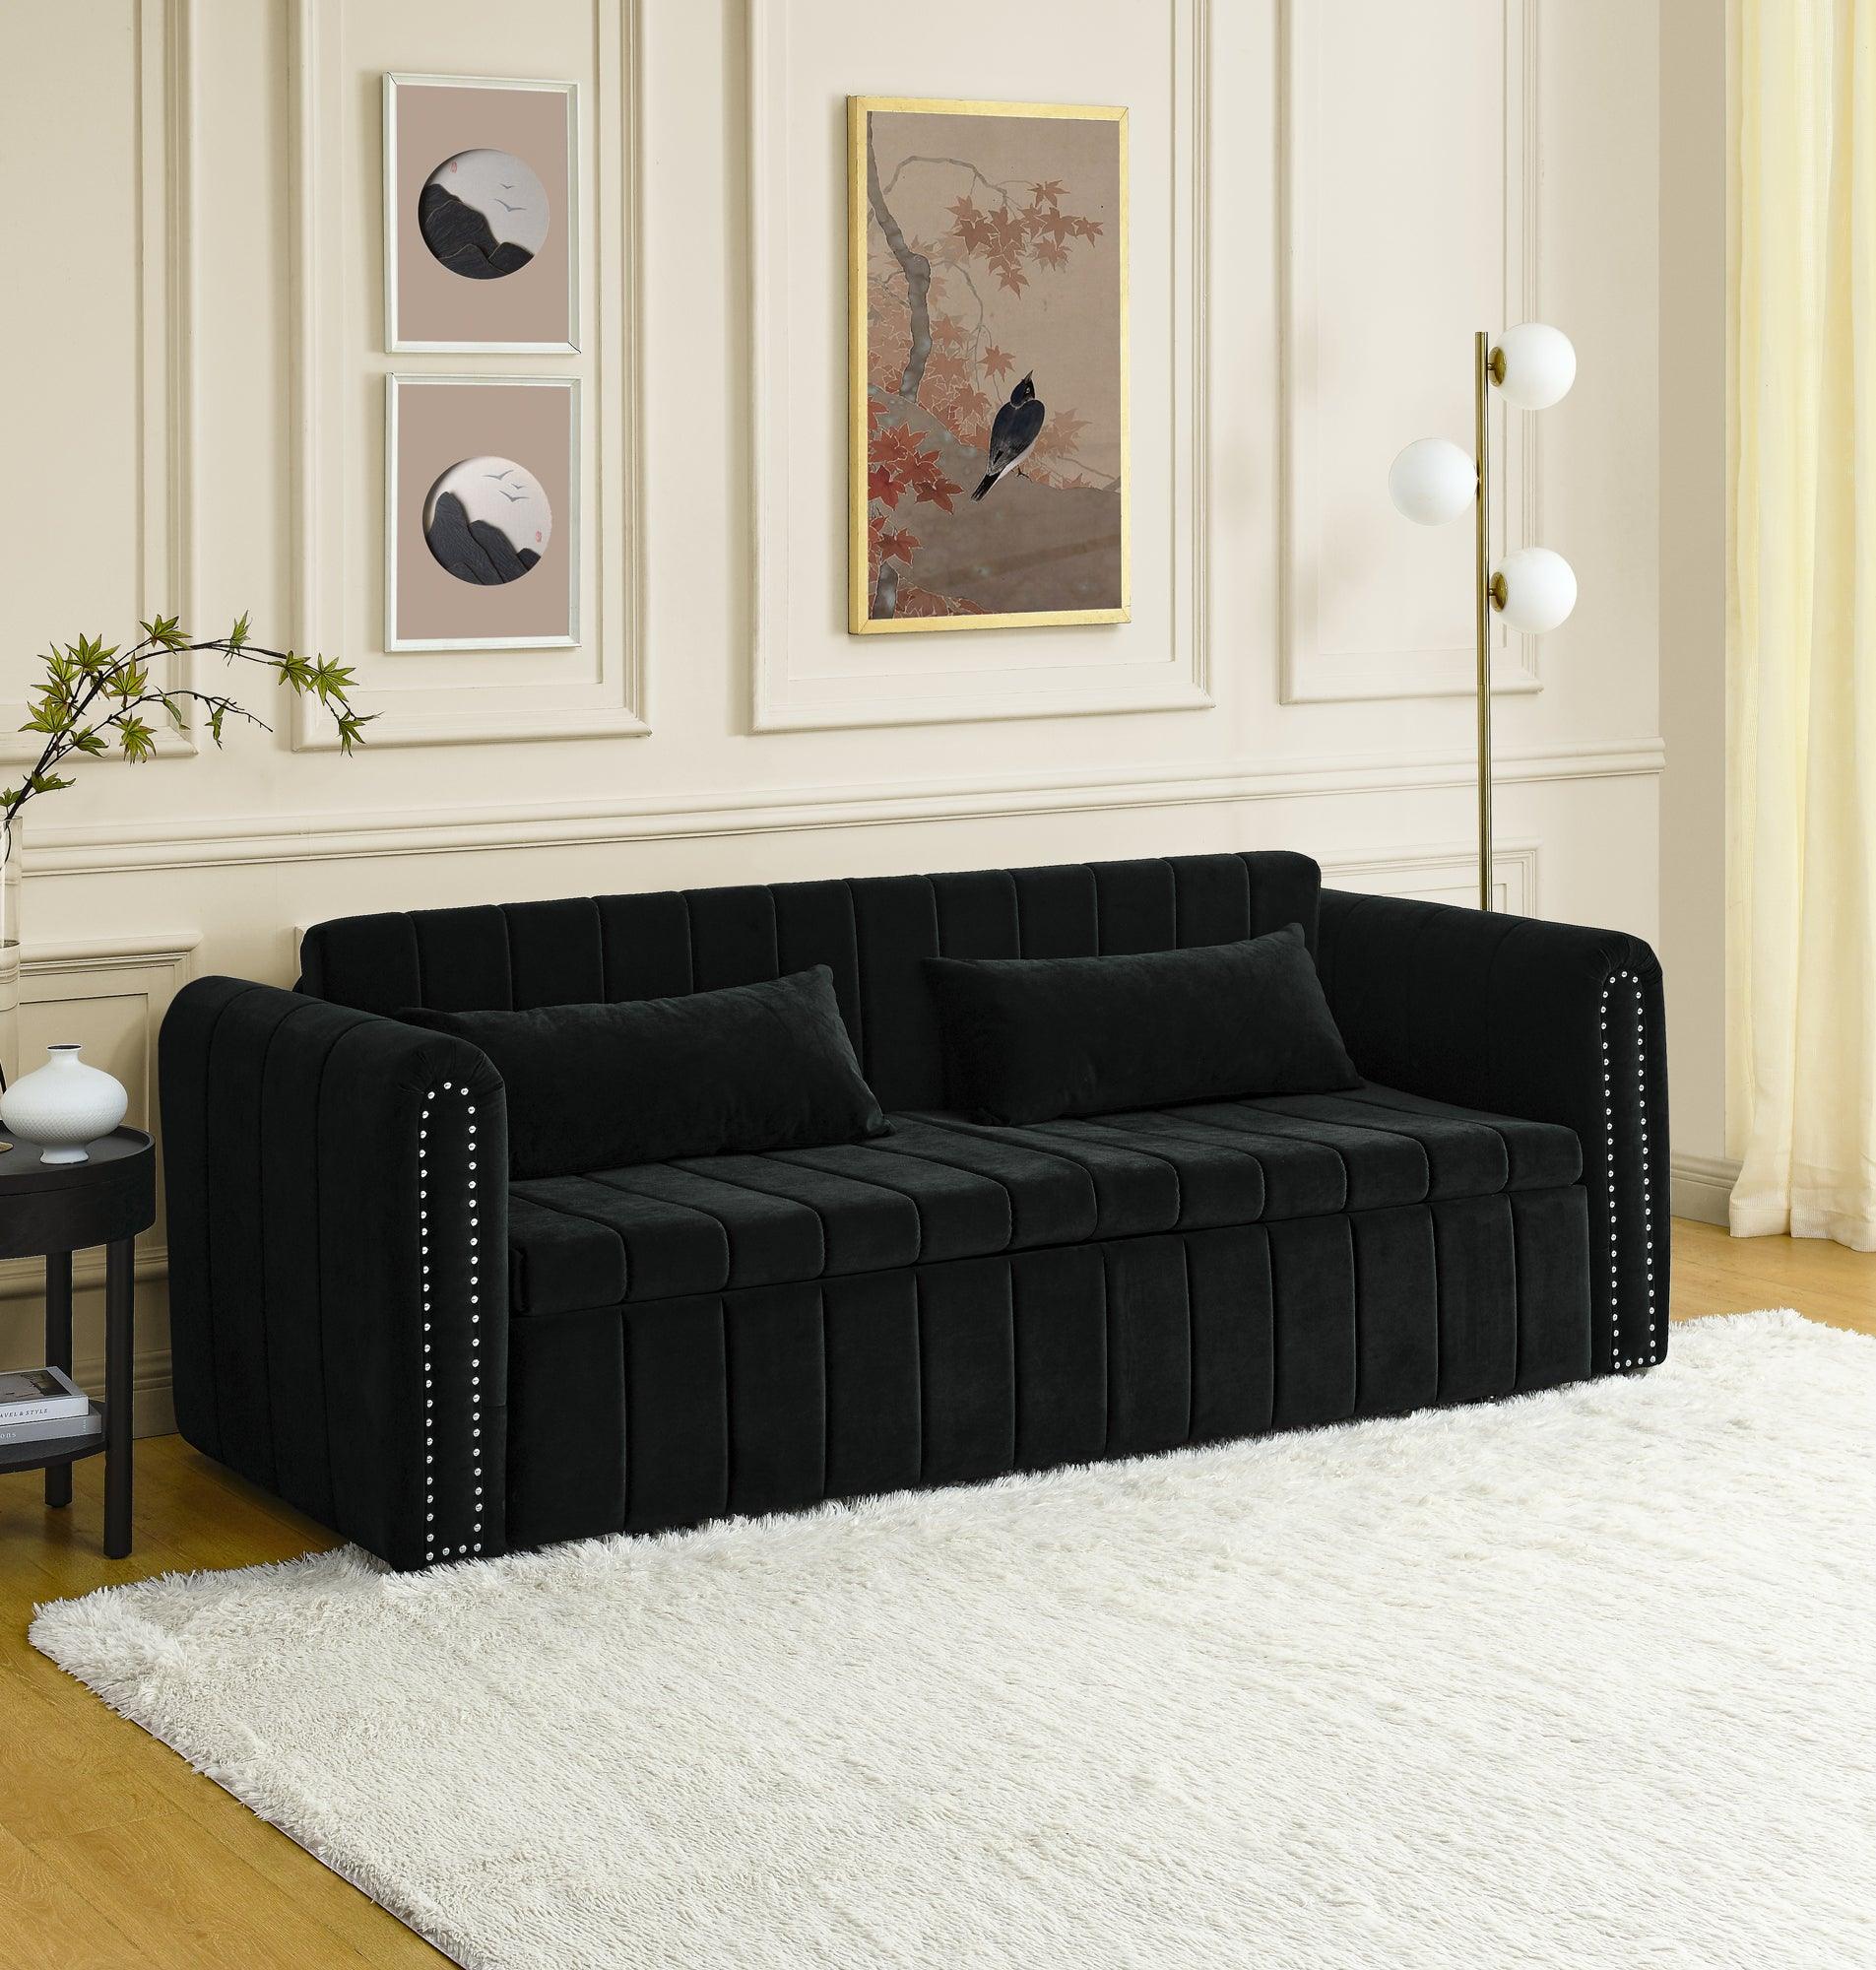 🆓🚛 3 in 1 Pull-Out Bed Sleeper Sofa, Rolled Arms, Copper Nails, 2 Drawers, 2 Pillows, Black